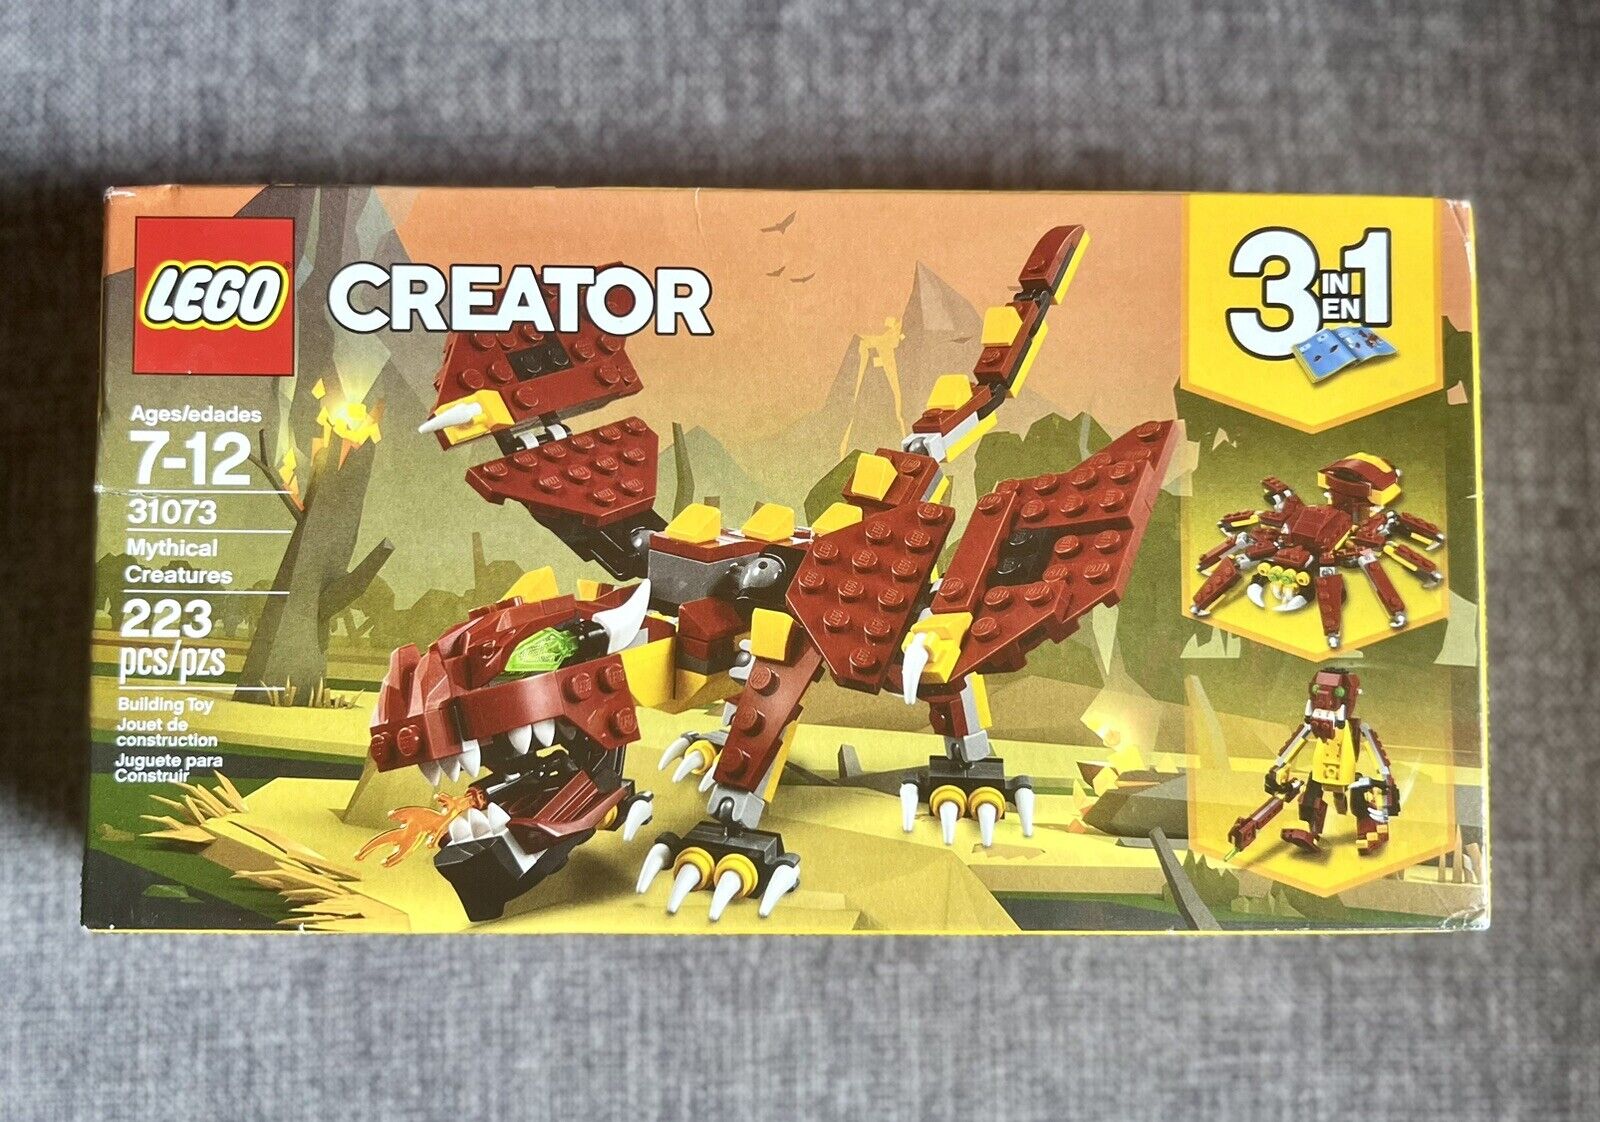 LEGO Creator Mythical Creatures (31073) 3 In 1 Dragon